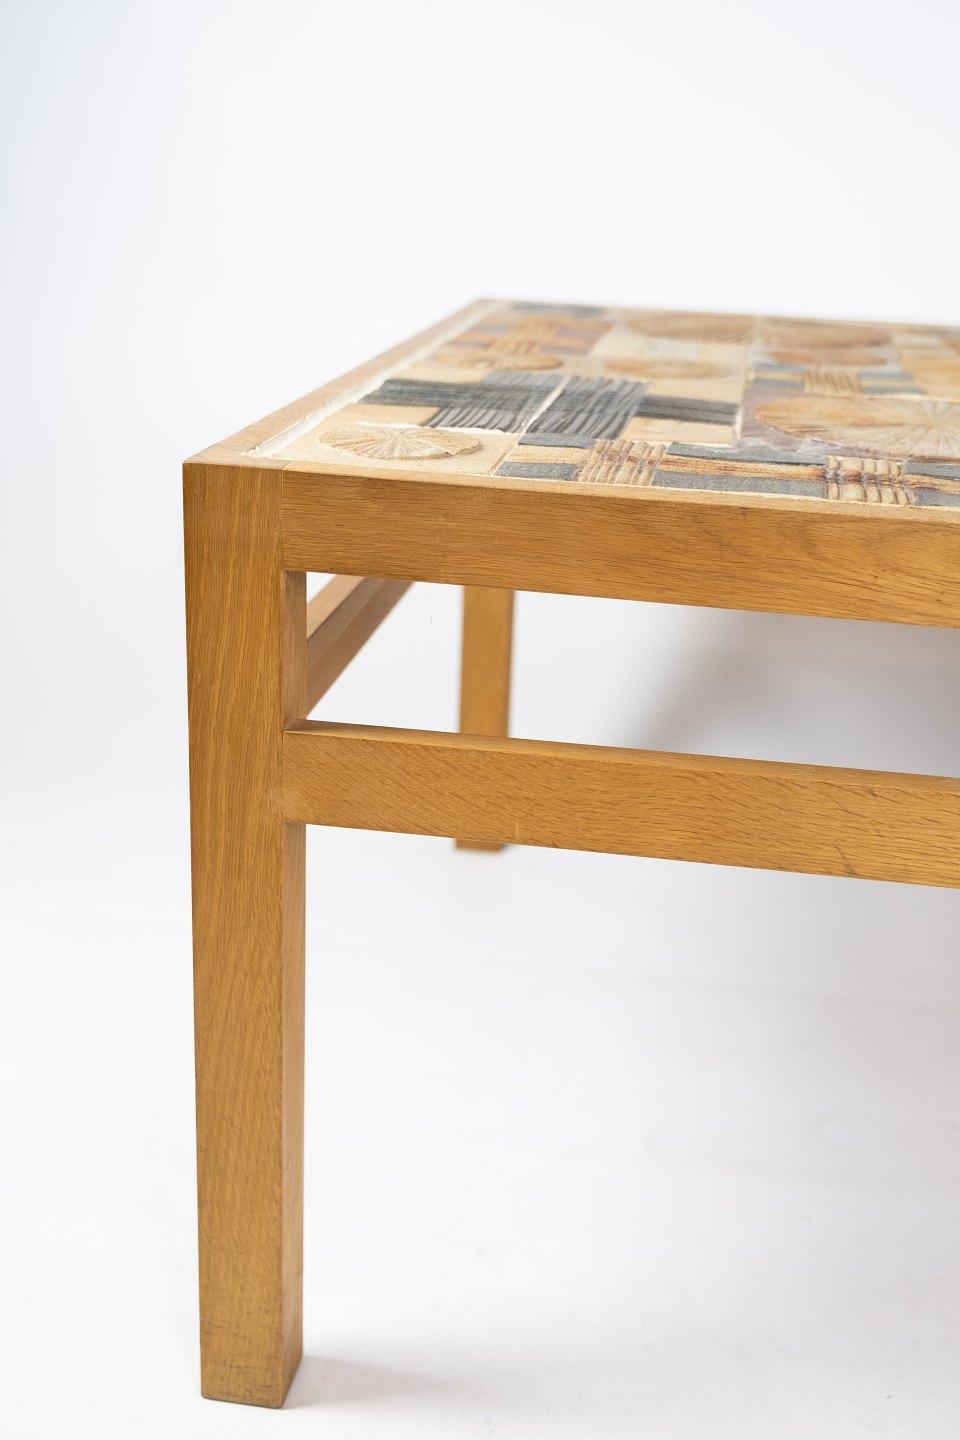 Ceramic Coffee Table in Oak and with Different Tiles, Designed by Tue Poulsen, 1970s